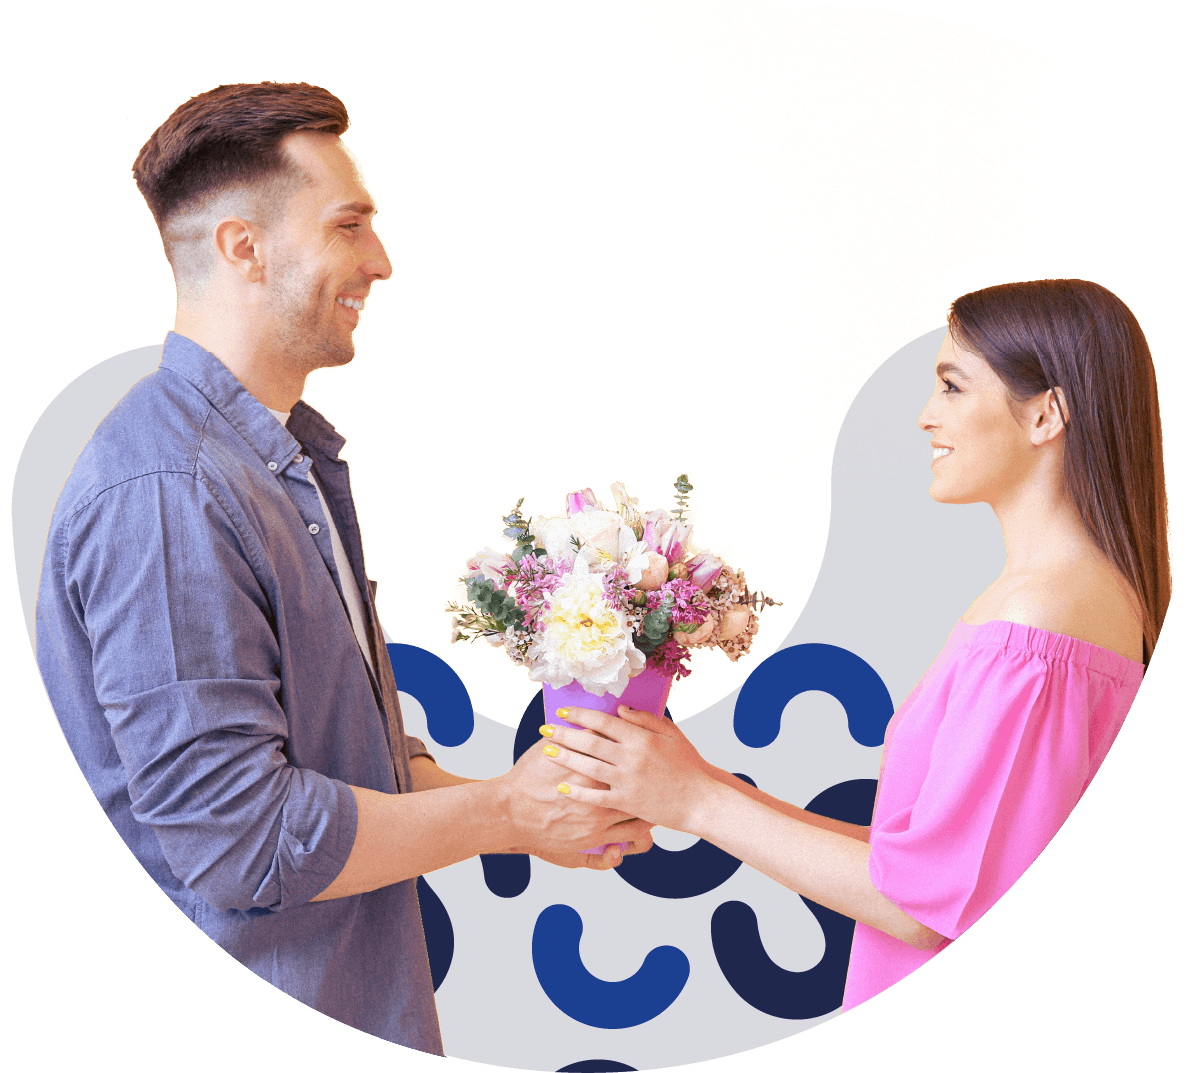 A man delivering a bouquet of flowers to a woman